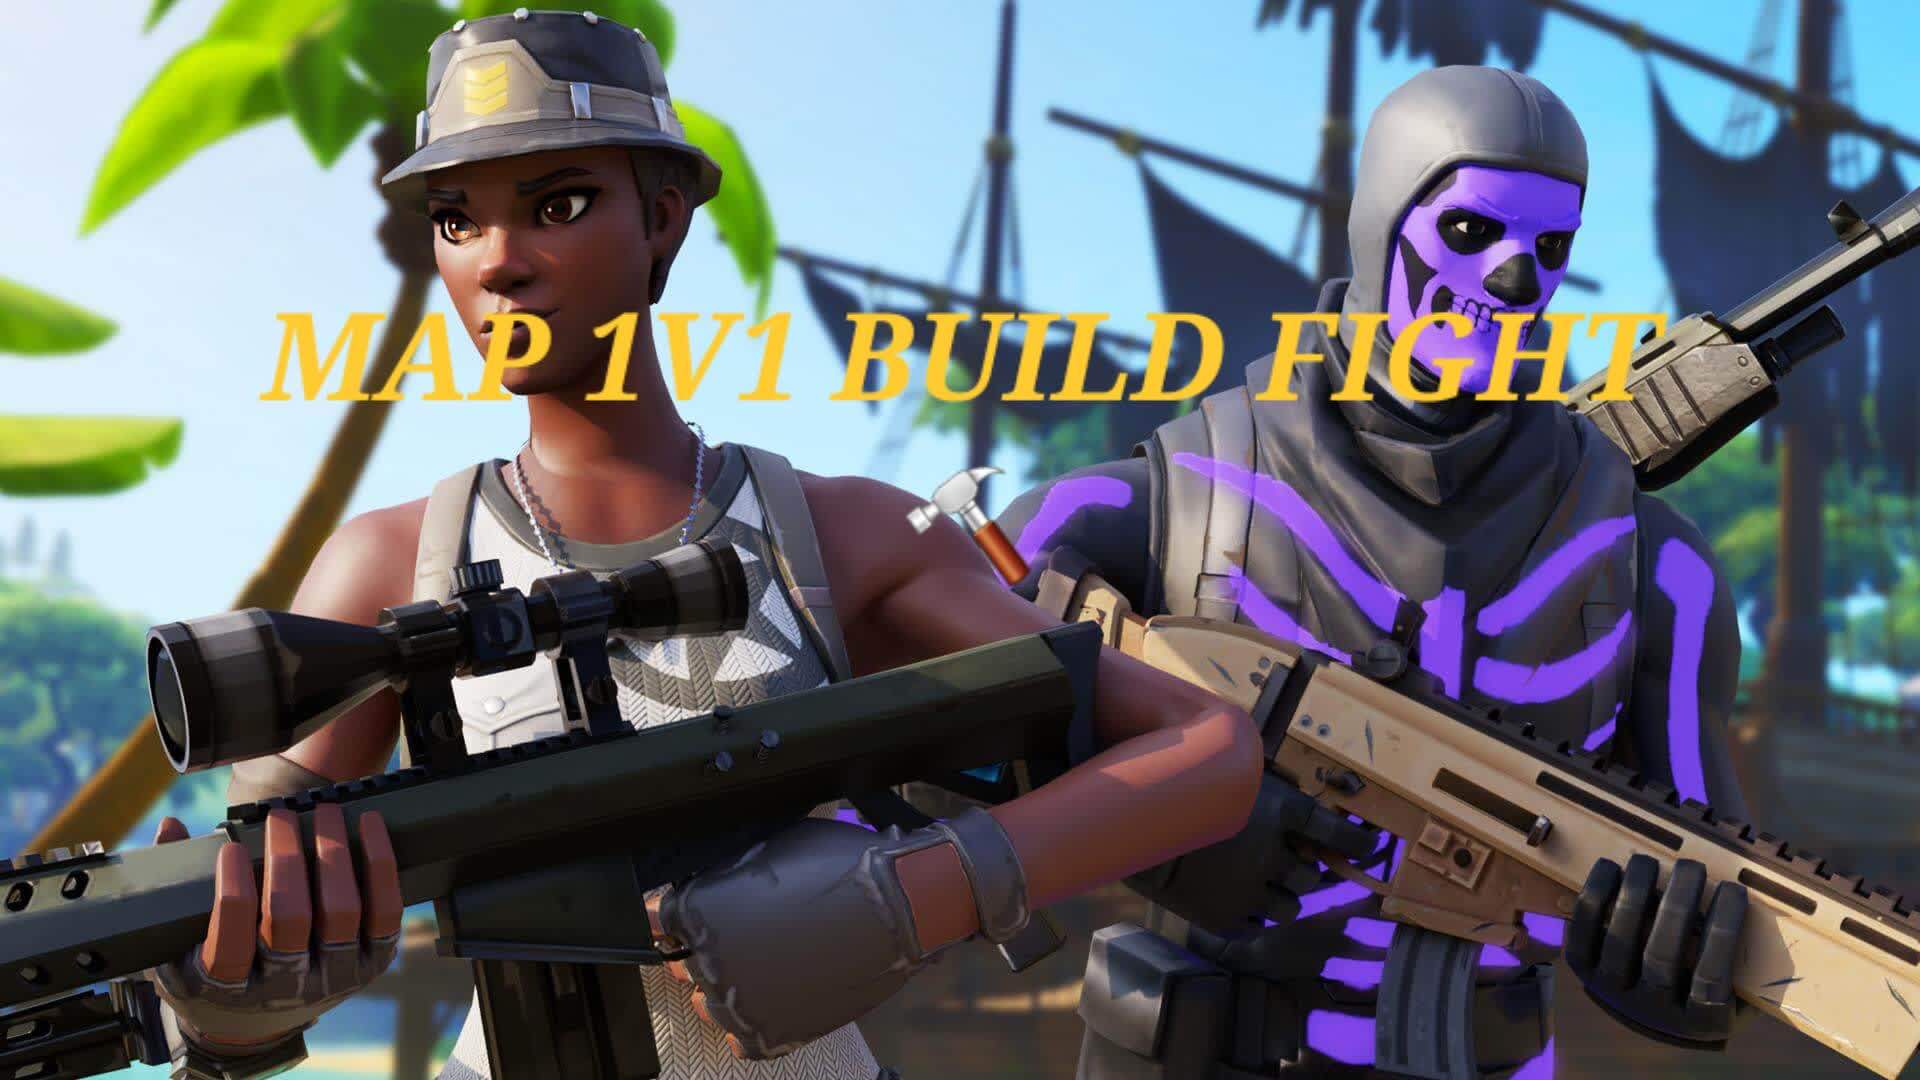 1V1 BUILD FIGHTS (2 Players Only) 1115-5696-8989 by e11 - Fortnite